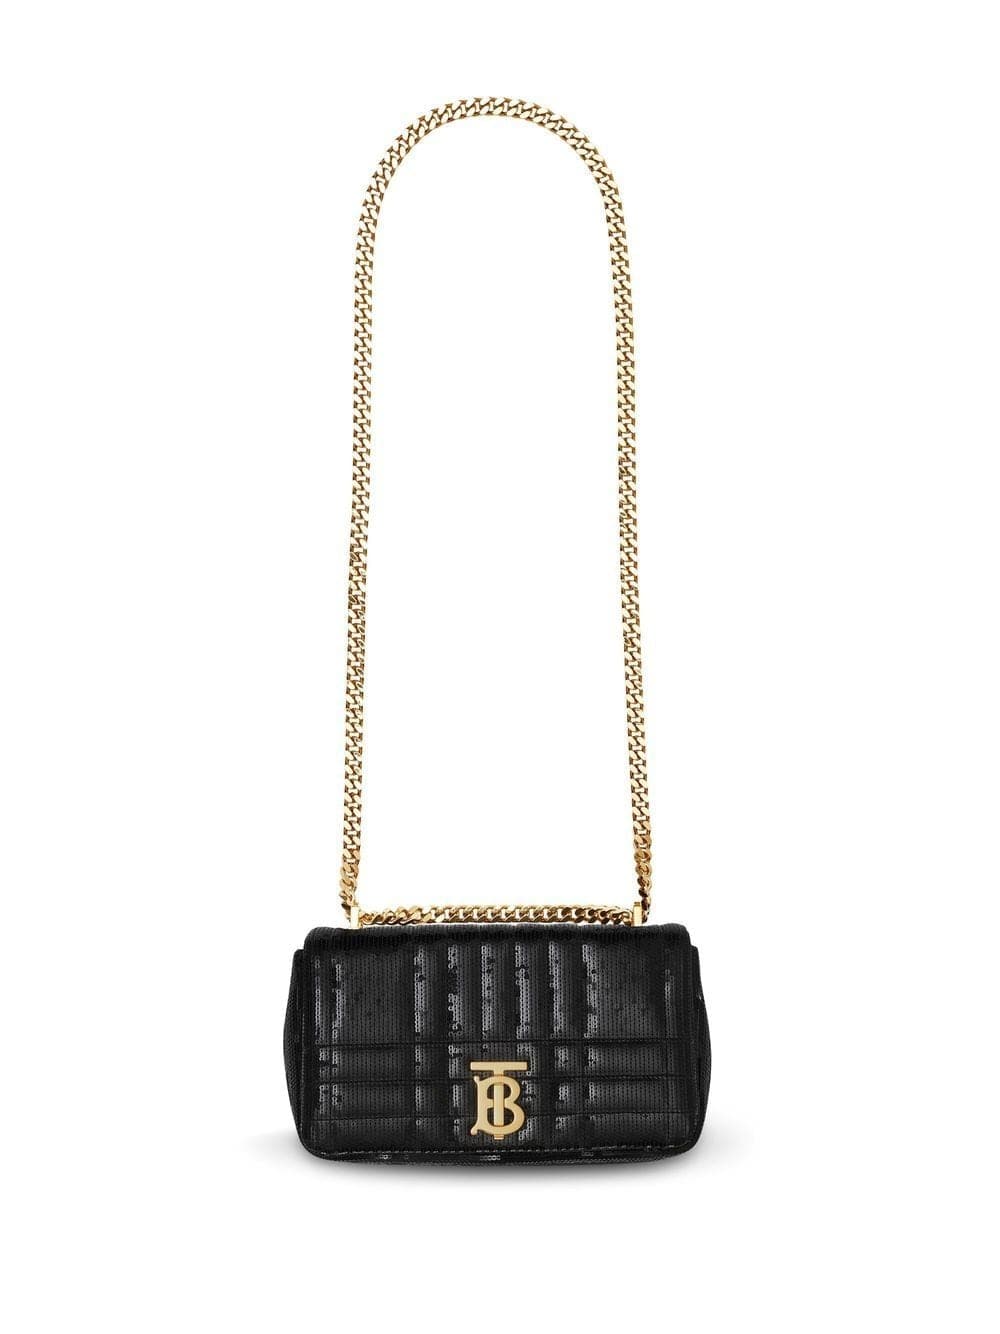 Burberry, Lola Sequined Quilted Mini Bag